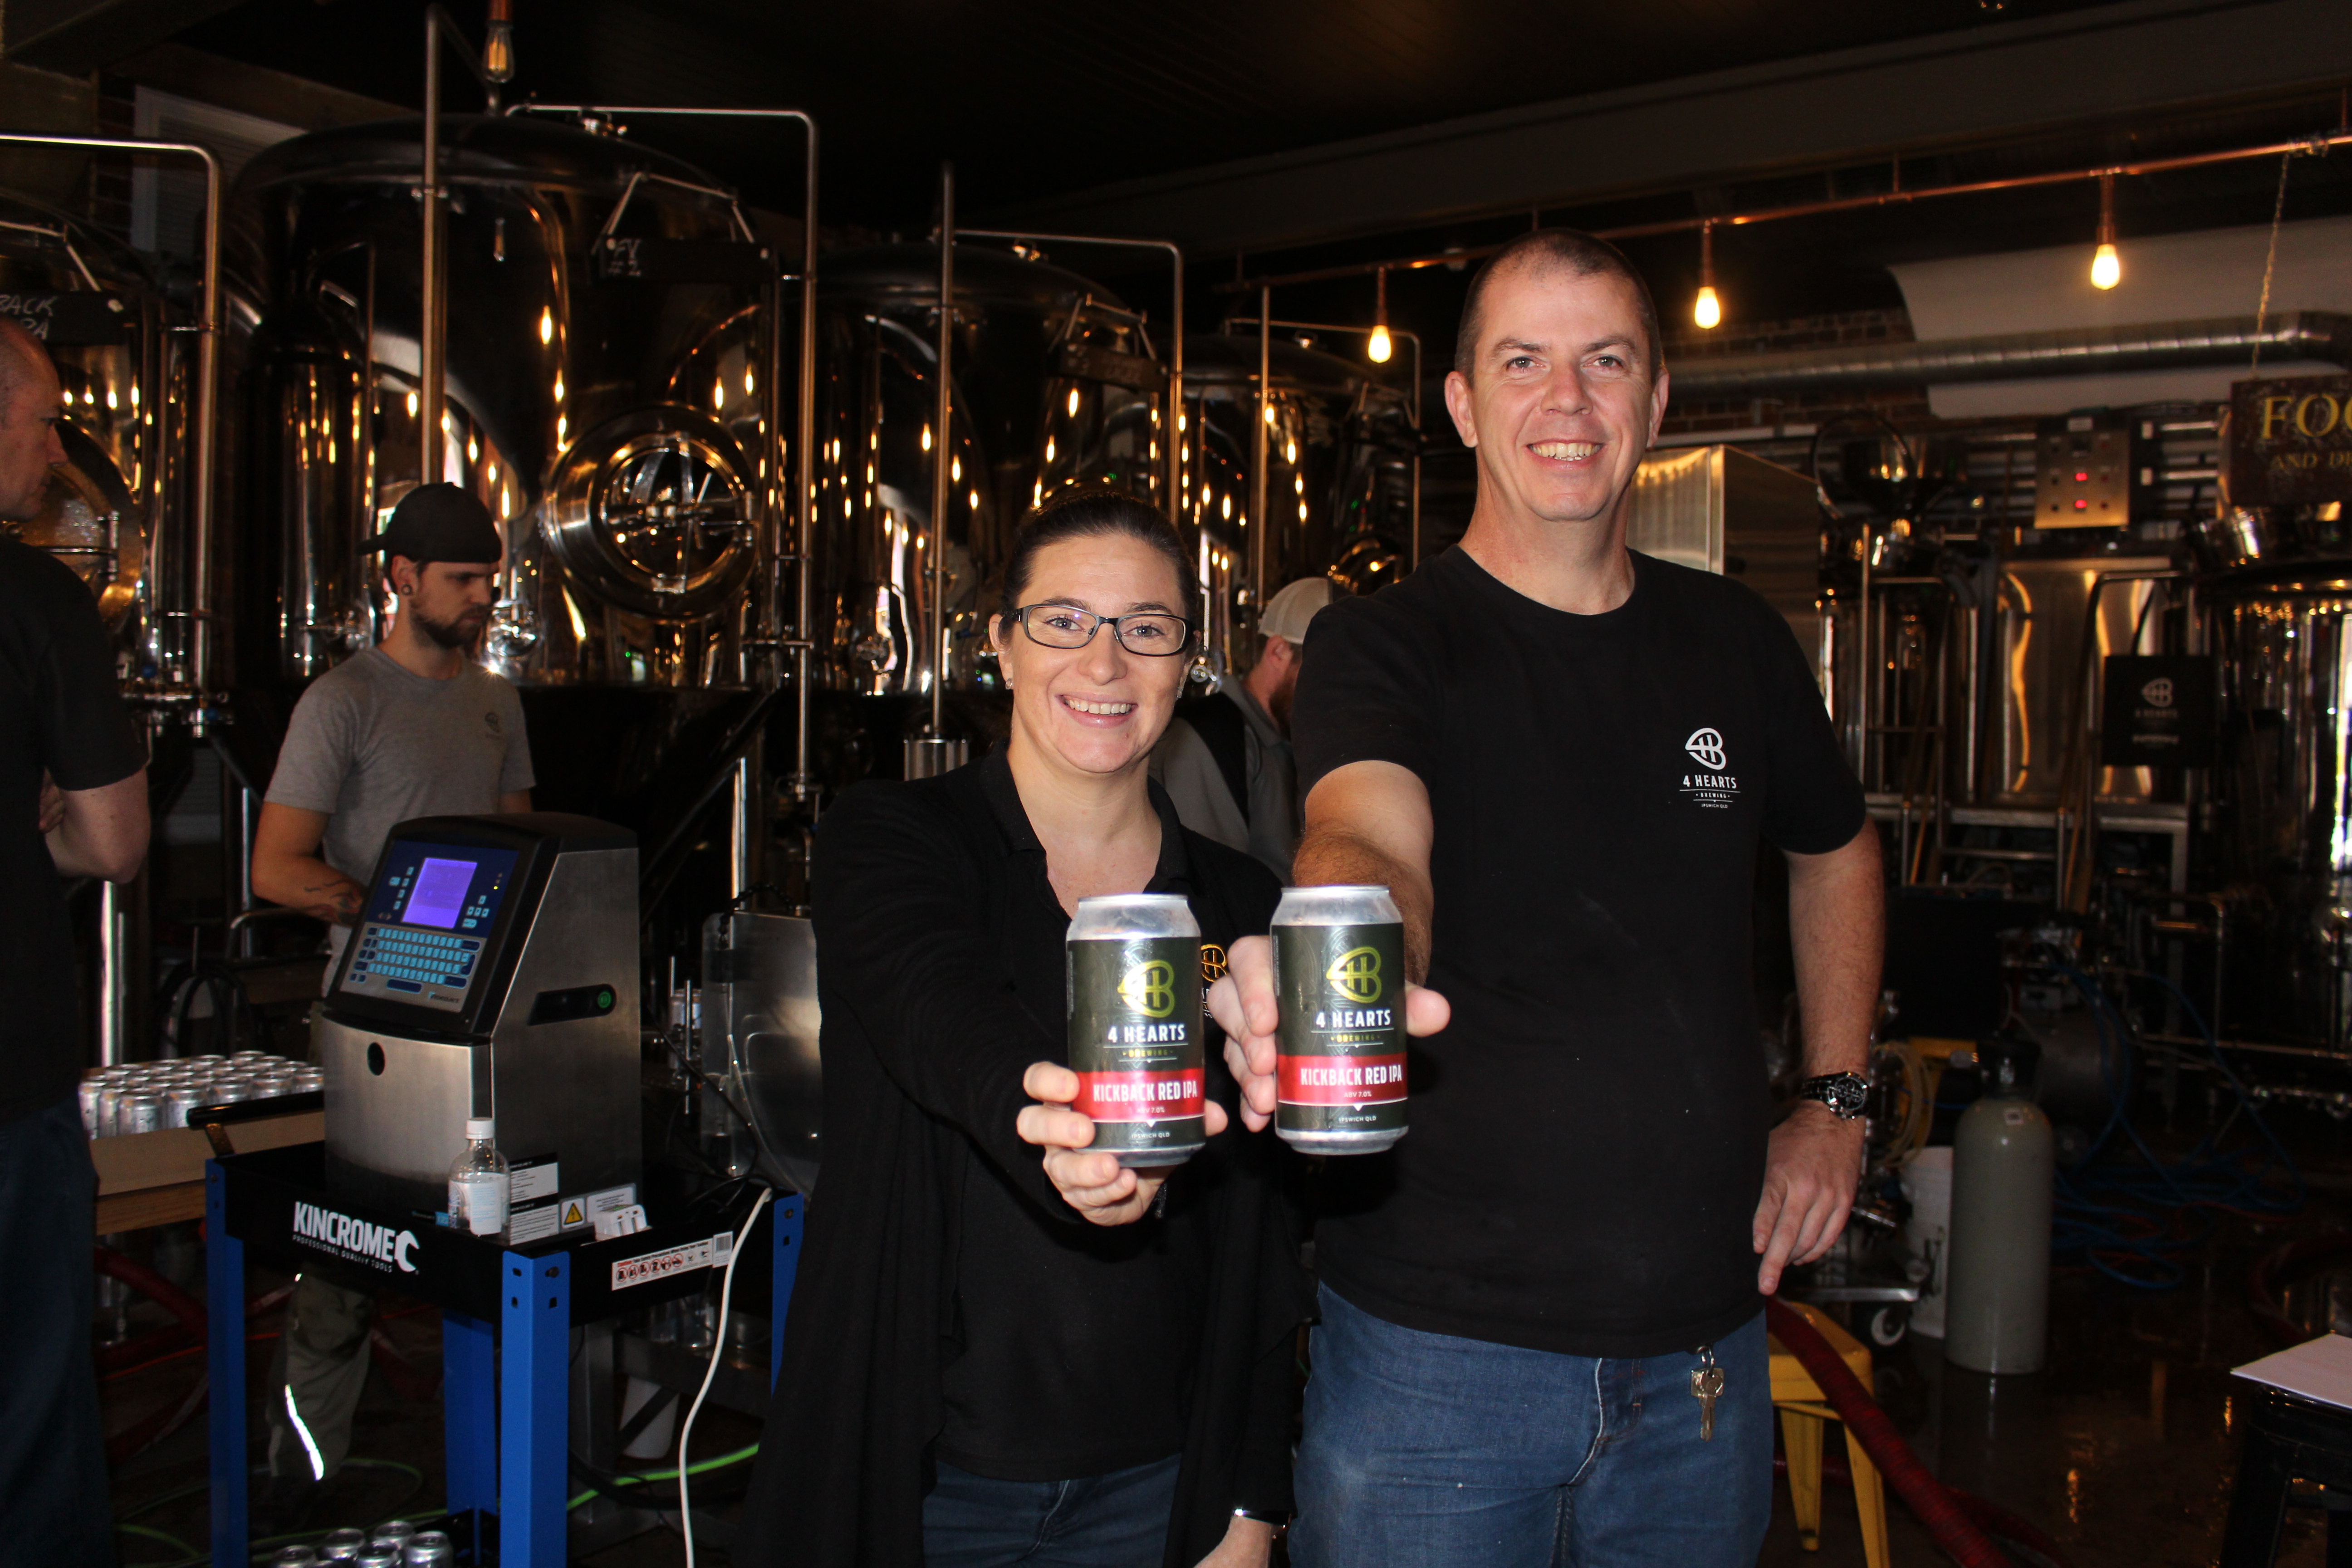 Carly Lindholm and Ken Friend with the new cans